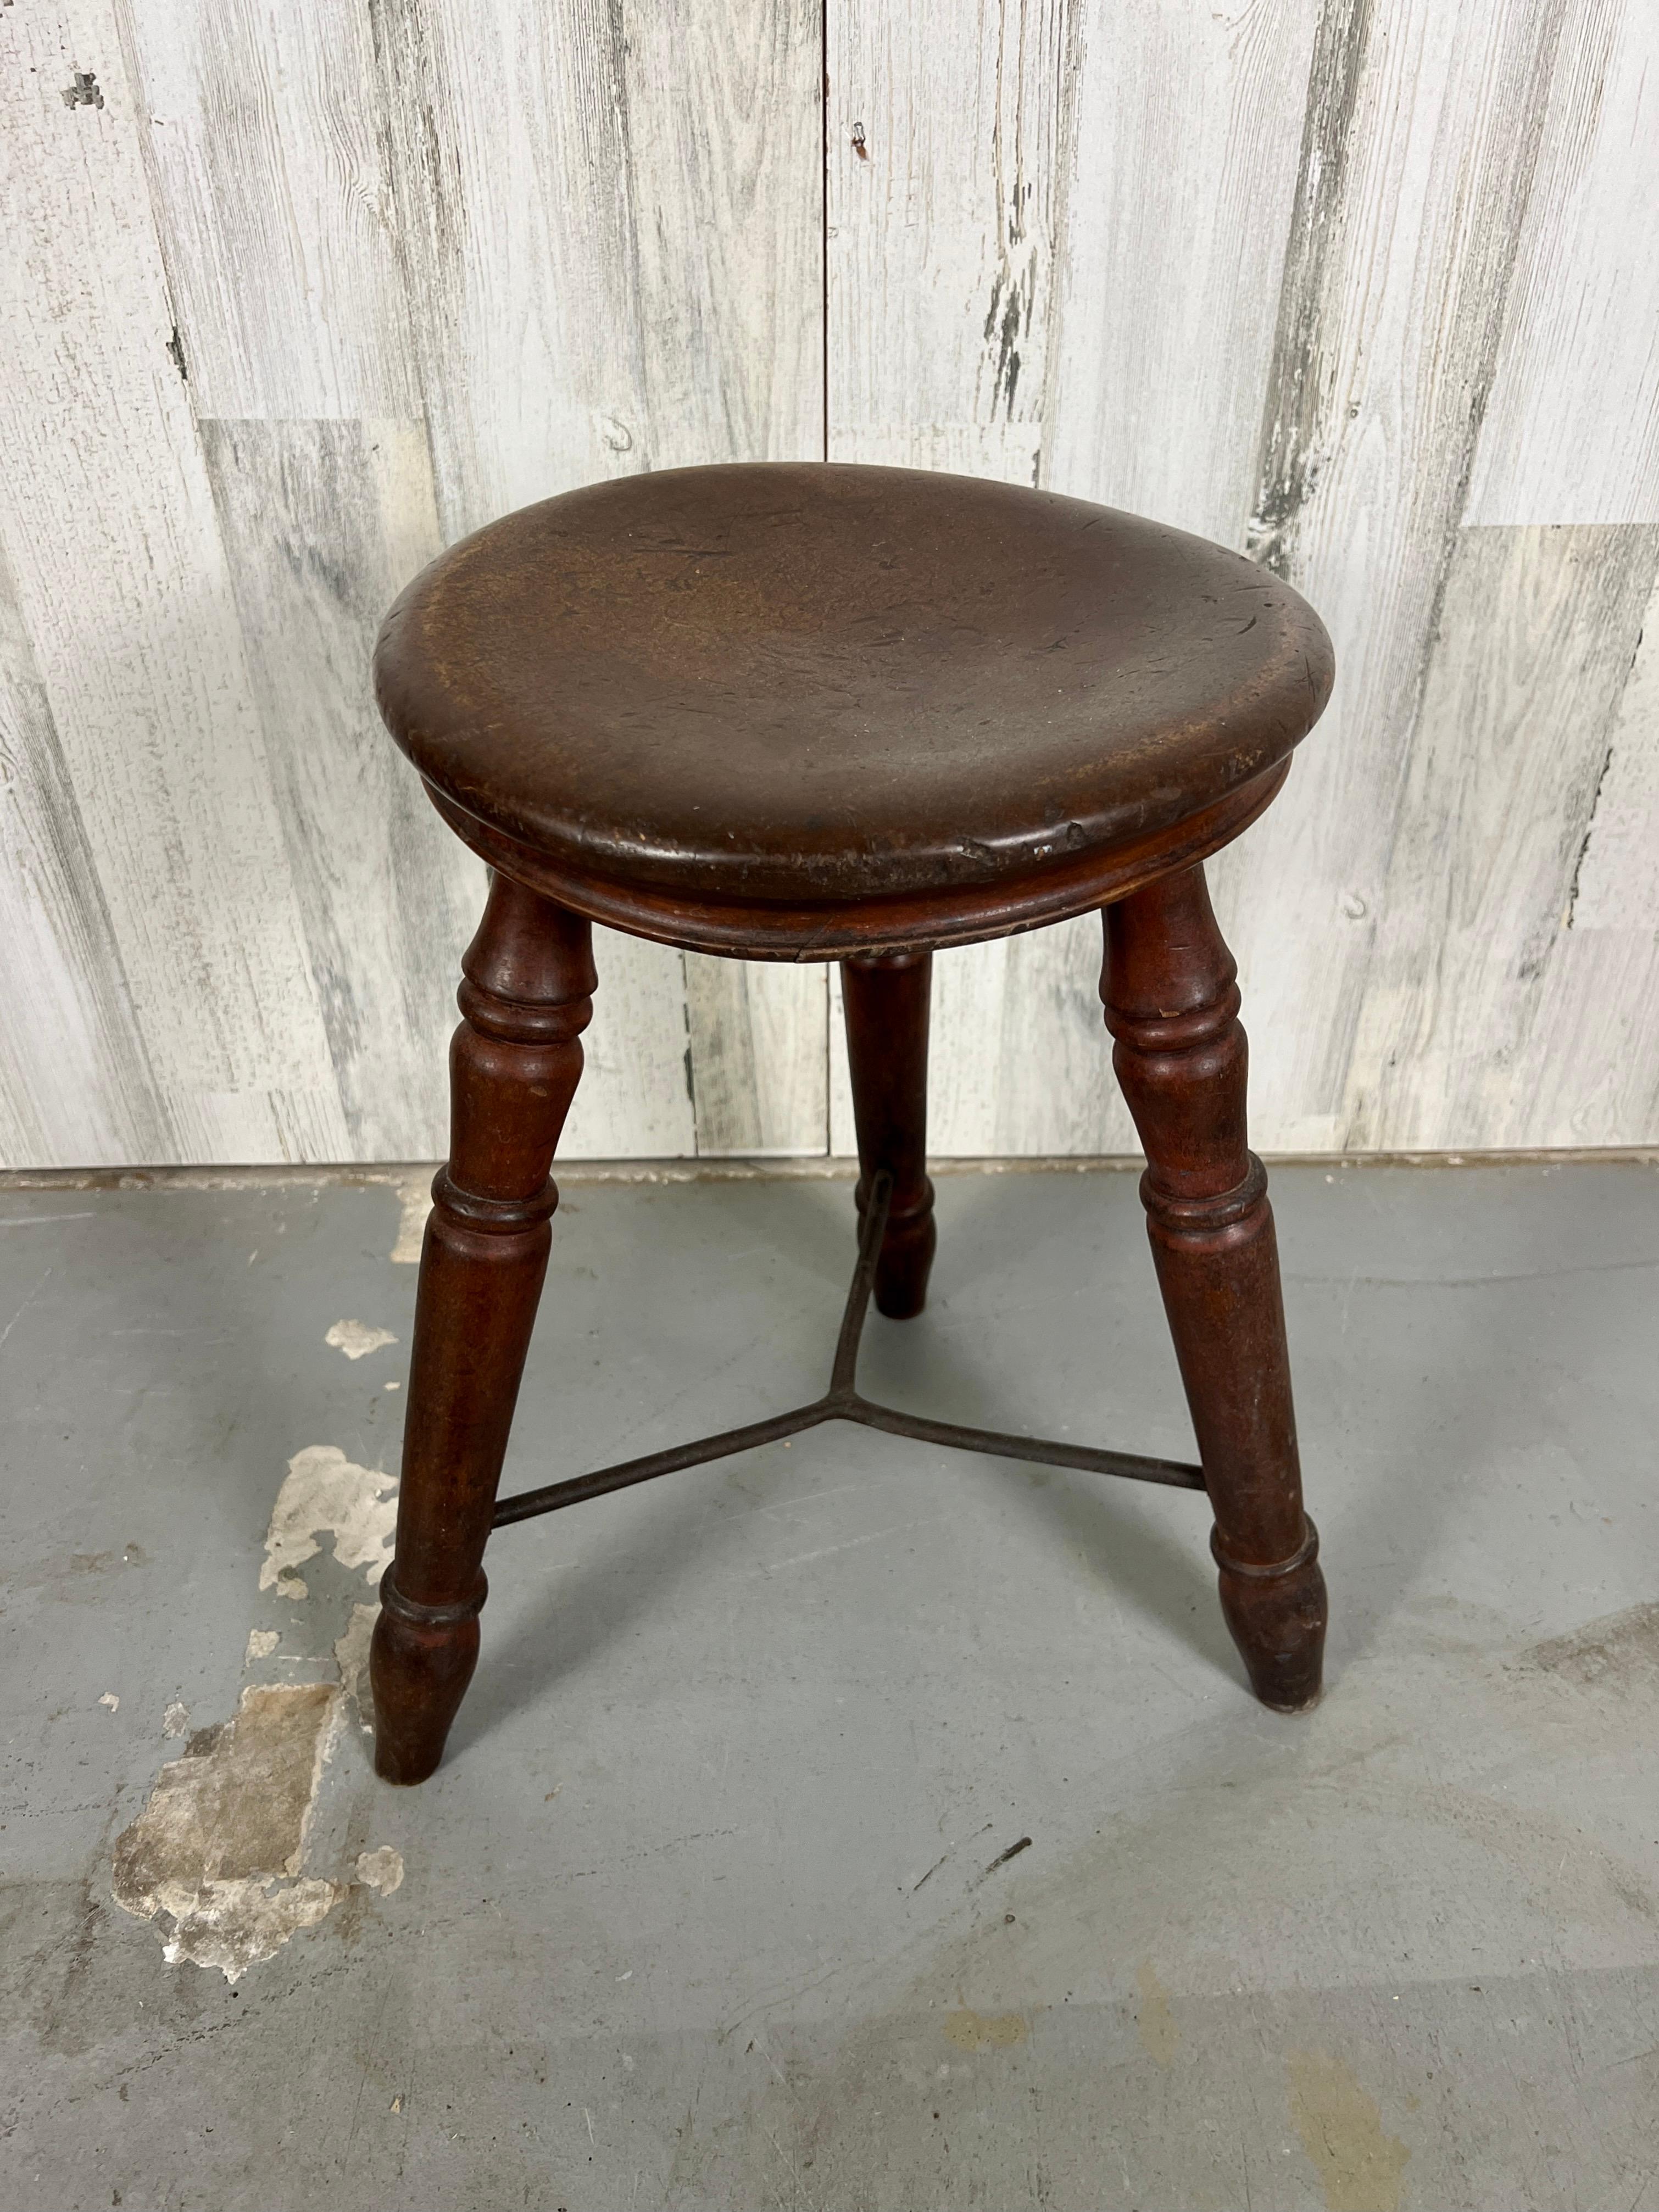 19th Century English Pub Stool In Good Condition For Sale In Denton, TX